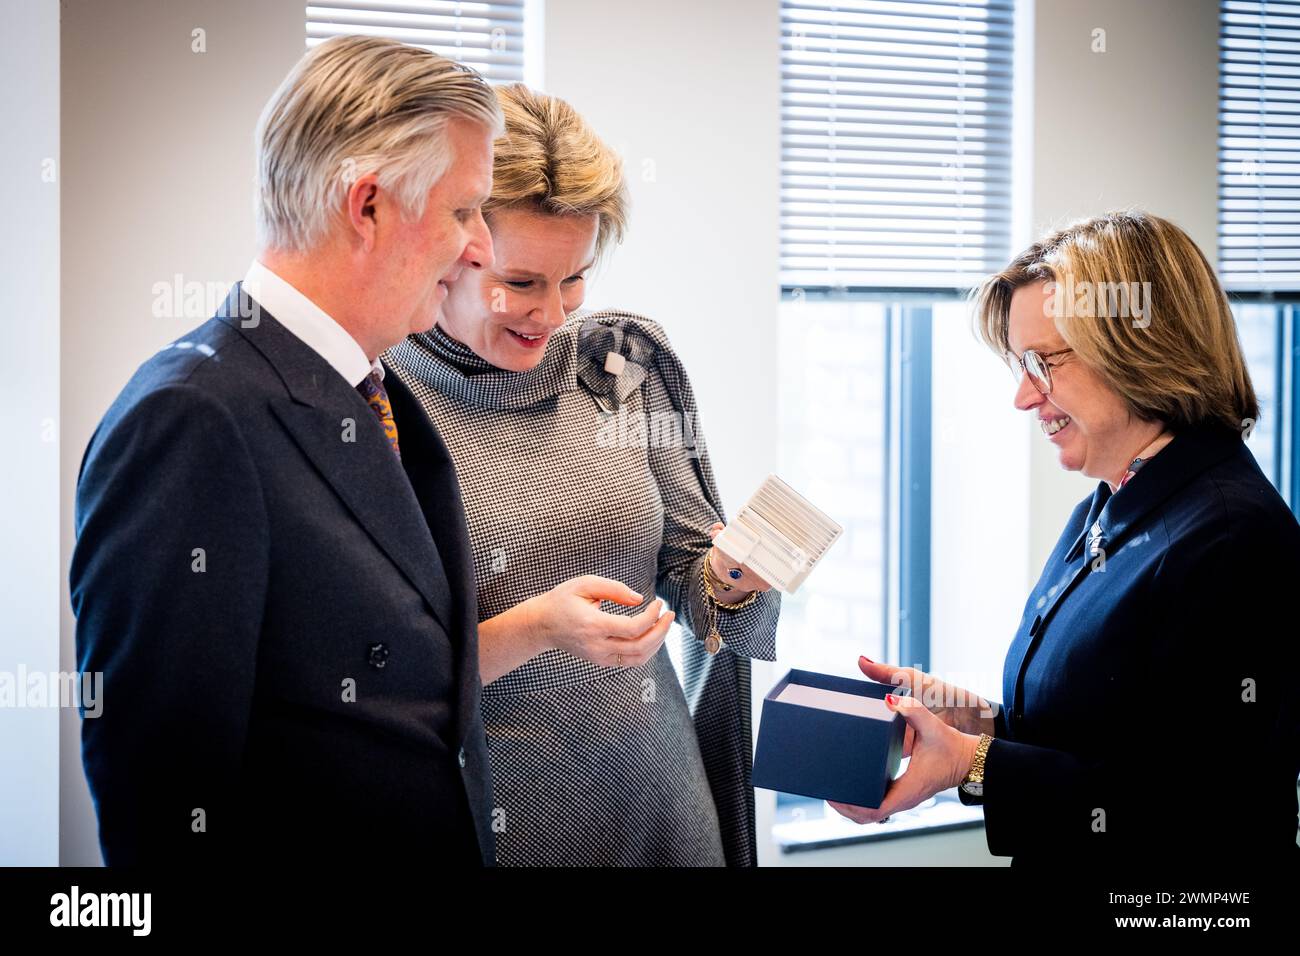 King Philippe - Filip of Belgium, Executive Director of Europol Catherine De Bolle and Queen Mathilde of Belgium pictured during a royal visit to the Europol headquarters in The Hague, the Netherlands, Tuesday 27 February 2024. Europol is the European police agency tasked with helping the Member States of the European Union to prevent and combat all forms of serious organised and international crime, cybercrime and terrorism. The visit will explain the agency's work and how it operates, before a meeting with Belgians who work there. BELGA PHOTO JASPER JACOBS Stock Photo